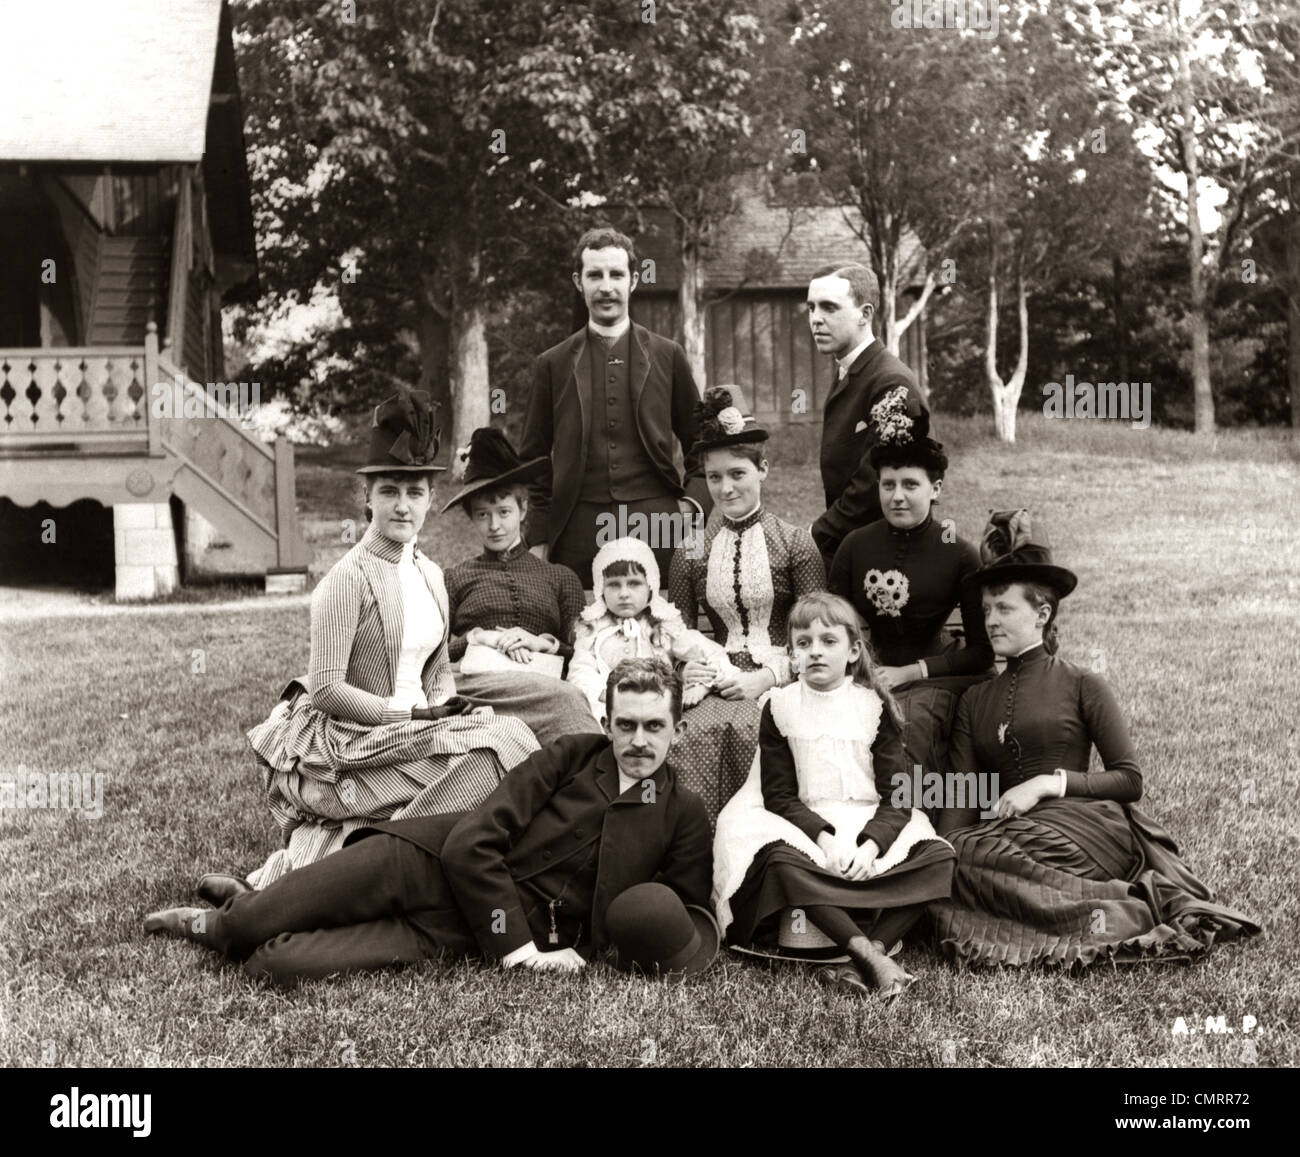 1890s LARGE FORMAL FAMILY GROUP PHOTO OUTSIDE Stock Photo